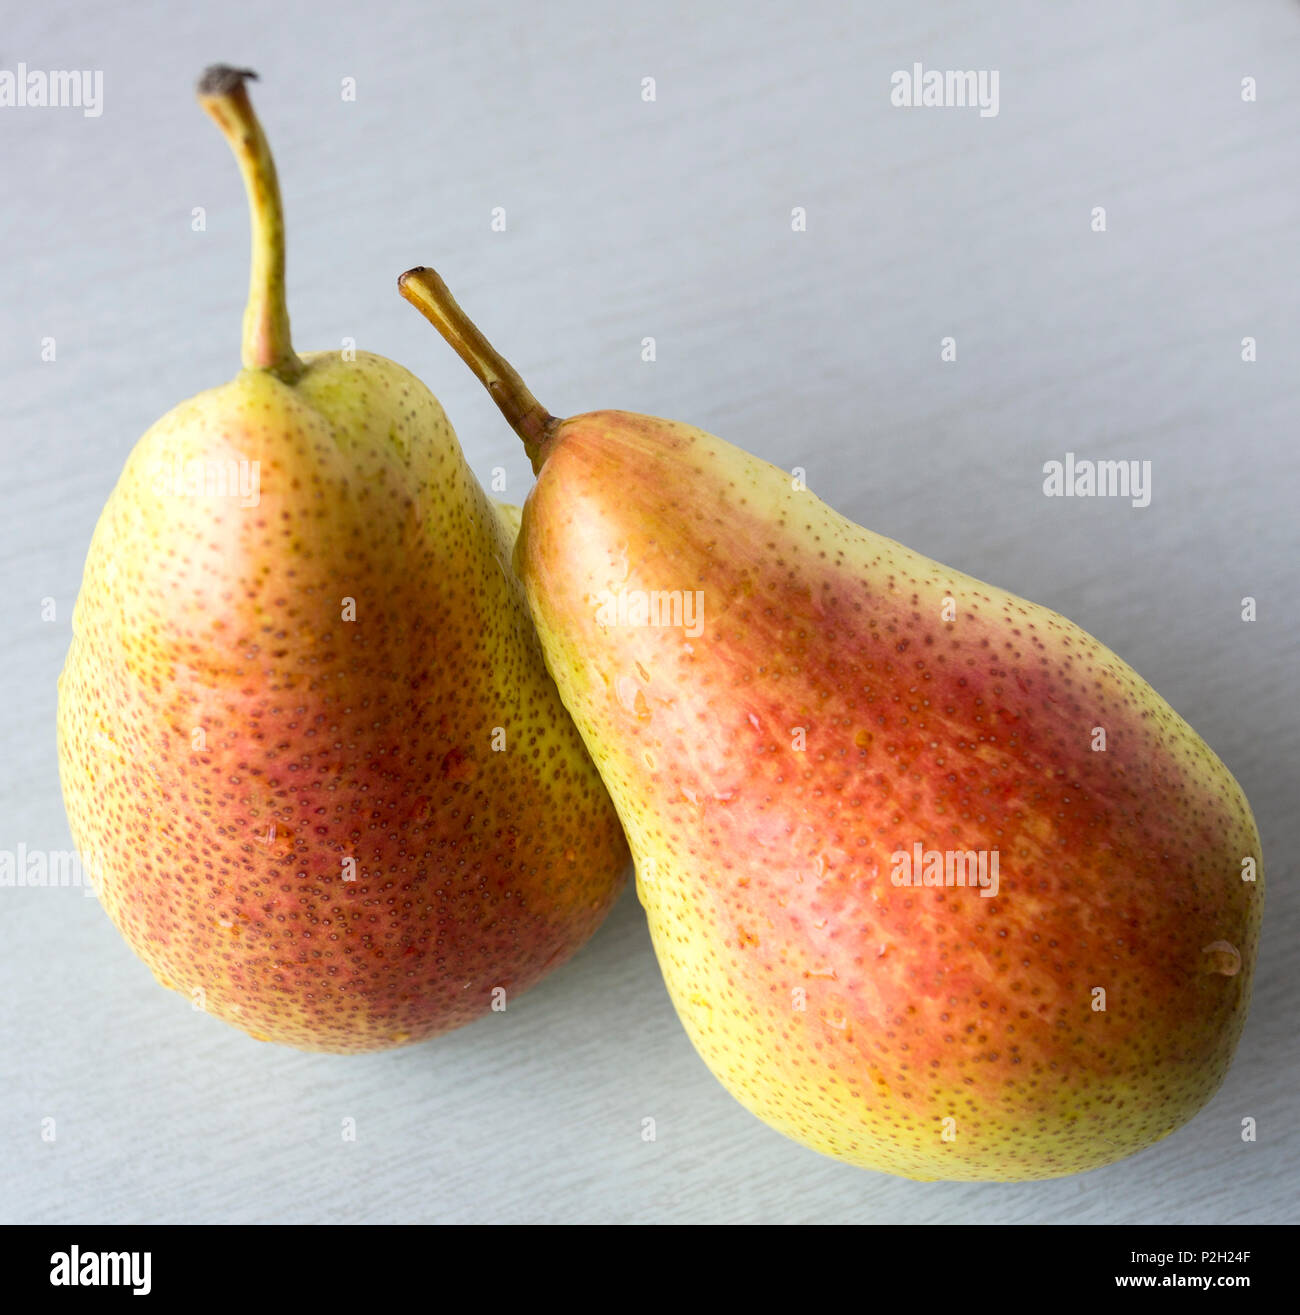 Forelle pear is a variety of pear originated in Germany, oblong and bell shaped and highly coloured. Stock Photo